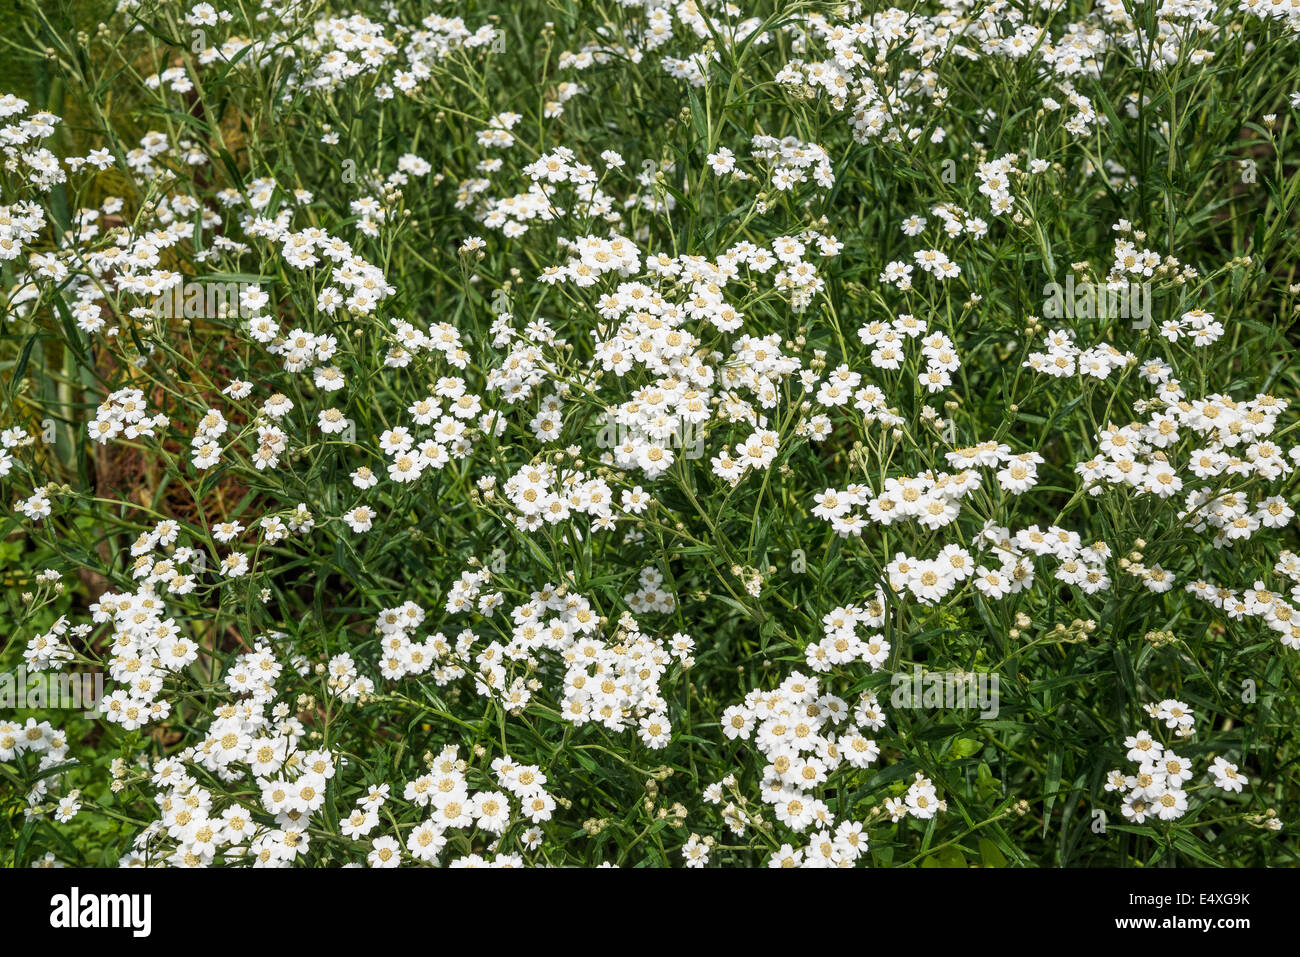 Tanacetum parthenium, traditional medicinal herb which is commonly used to prevent migraine headaches, Kew Gardens, London Stock Photo